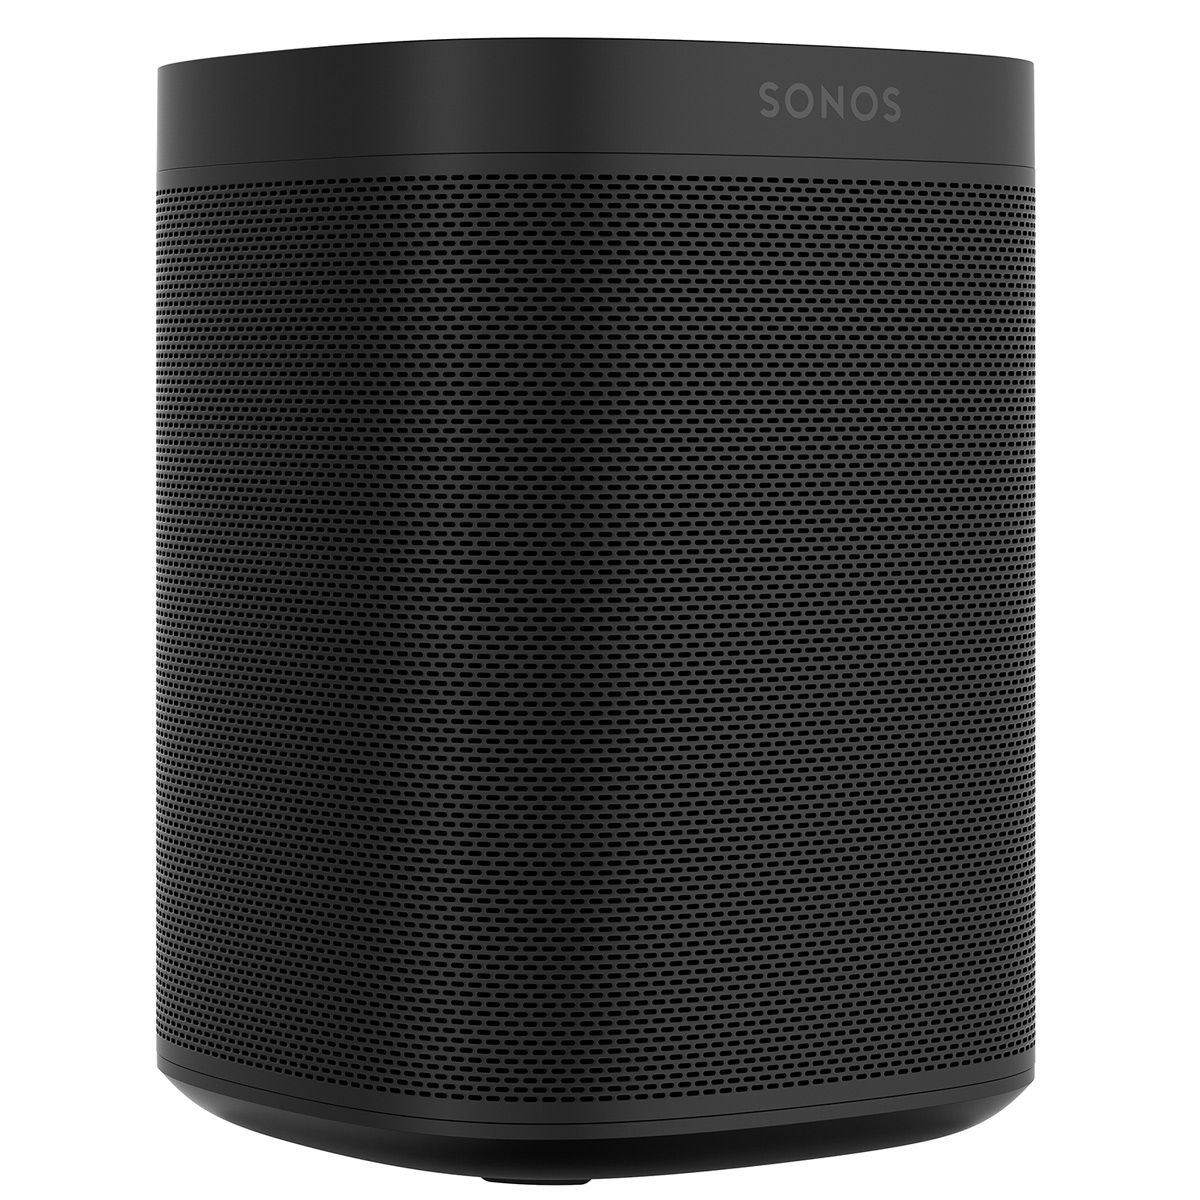 Sonos Two Room Set with Sonos One Gen 2 - Smart Speaker with Voice Control Built-In(Black) - image 3 of 4